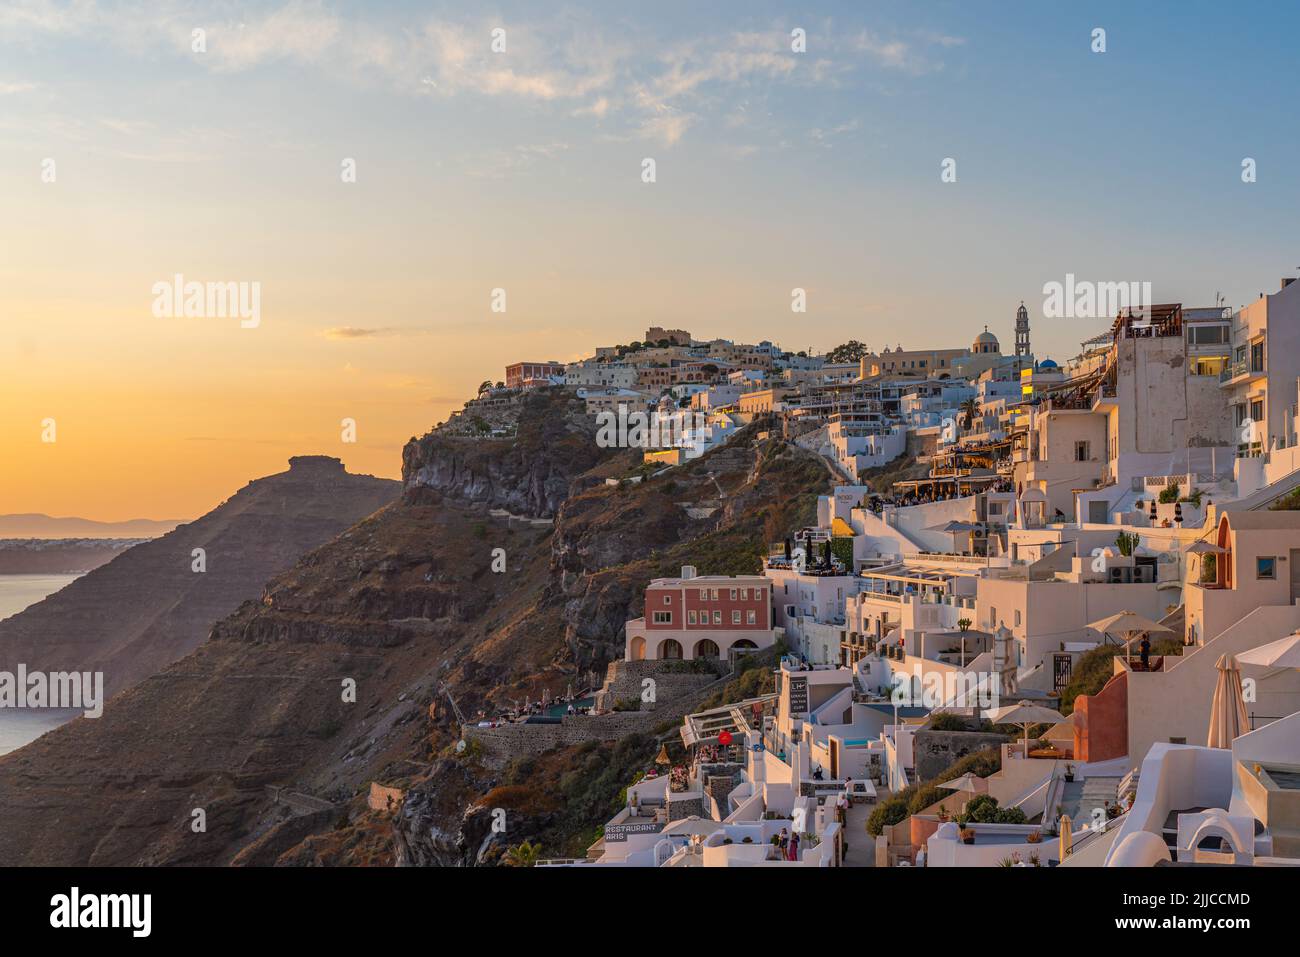 FIRA, GREECE - MAY 21.2022: View at sunset time from Fira, the capital of Santorini island in Greece Stock Photo